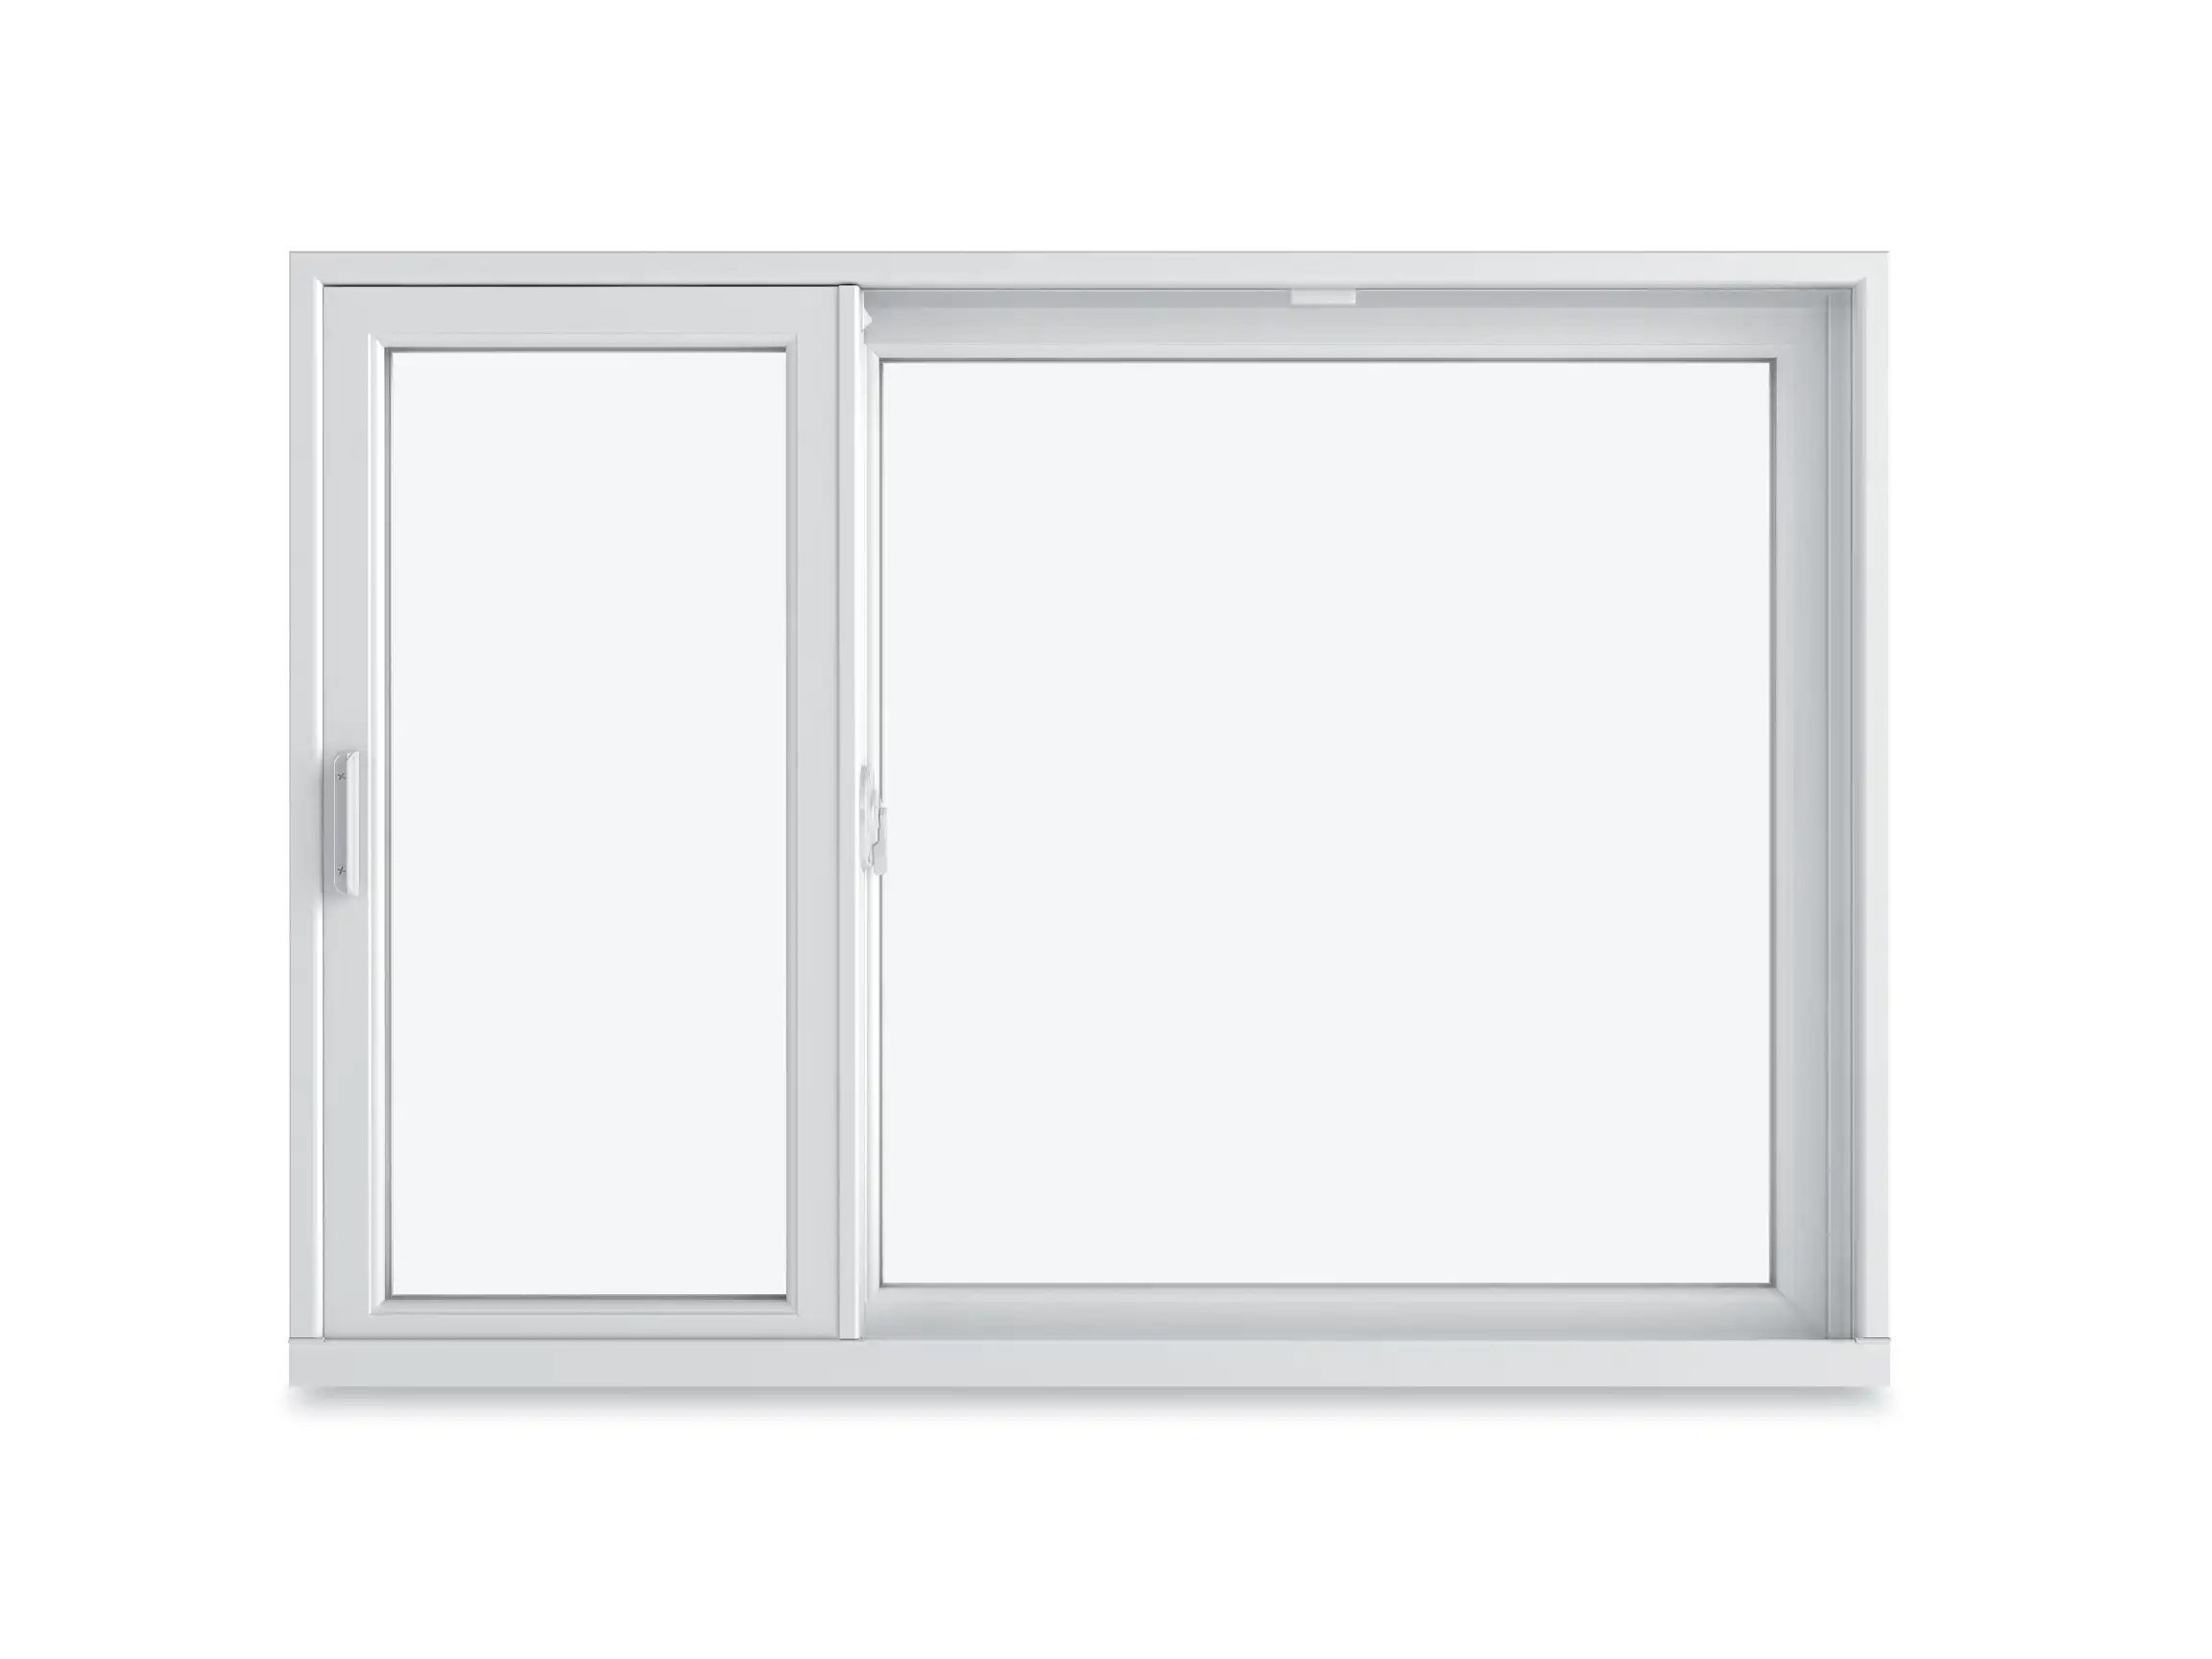 Image of a white Marvin Replacement Slider window with unequal sash size.